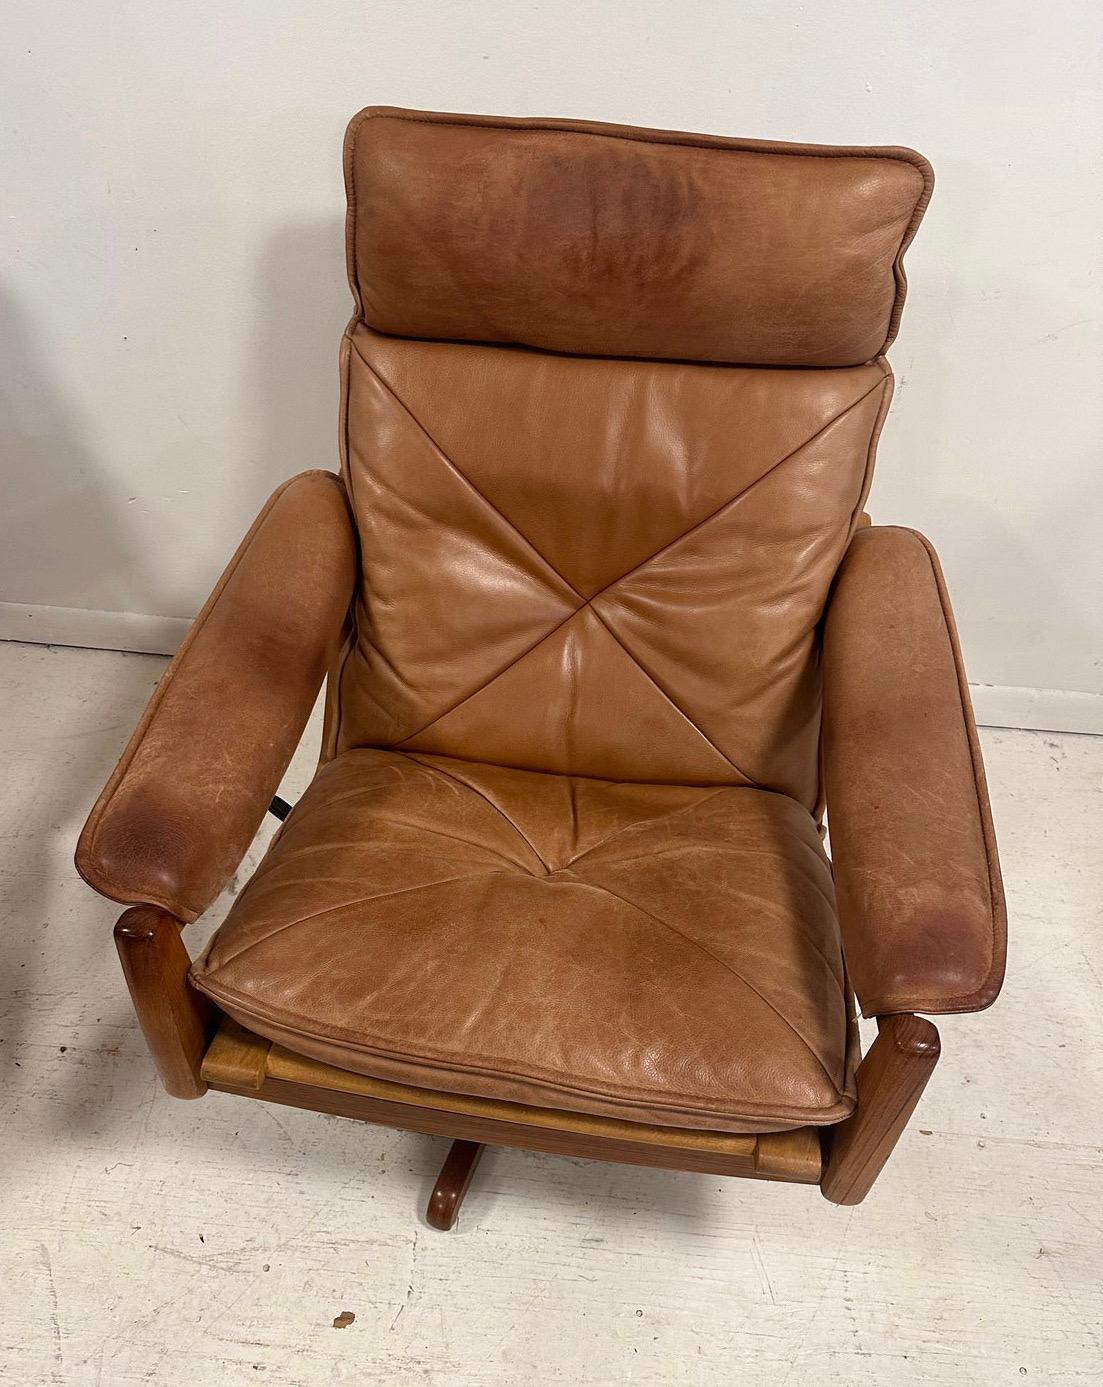 1970s soda galvino Denmark solid teak recliners with ottomans  For Sale 1